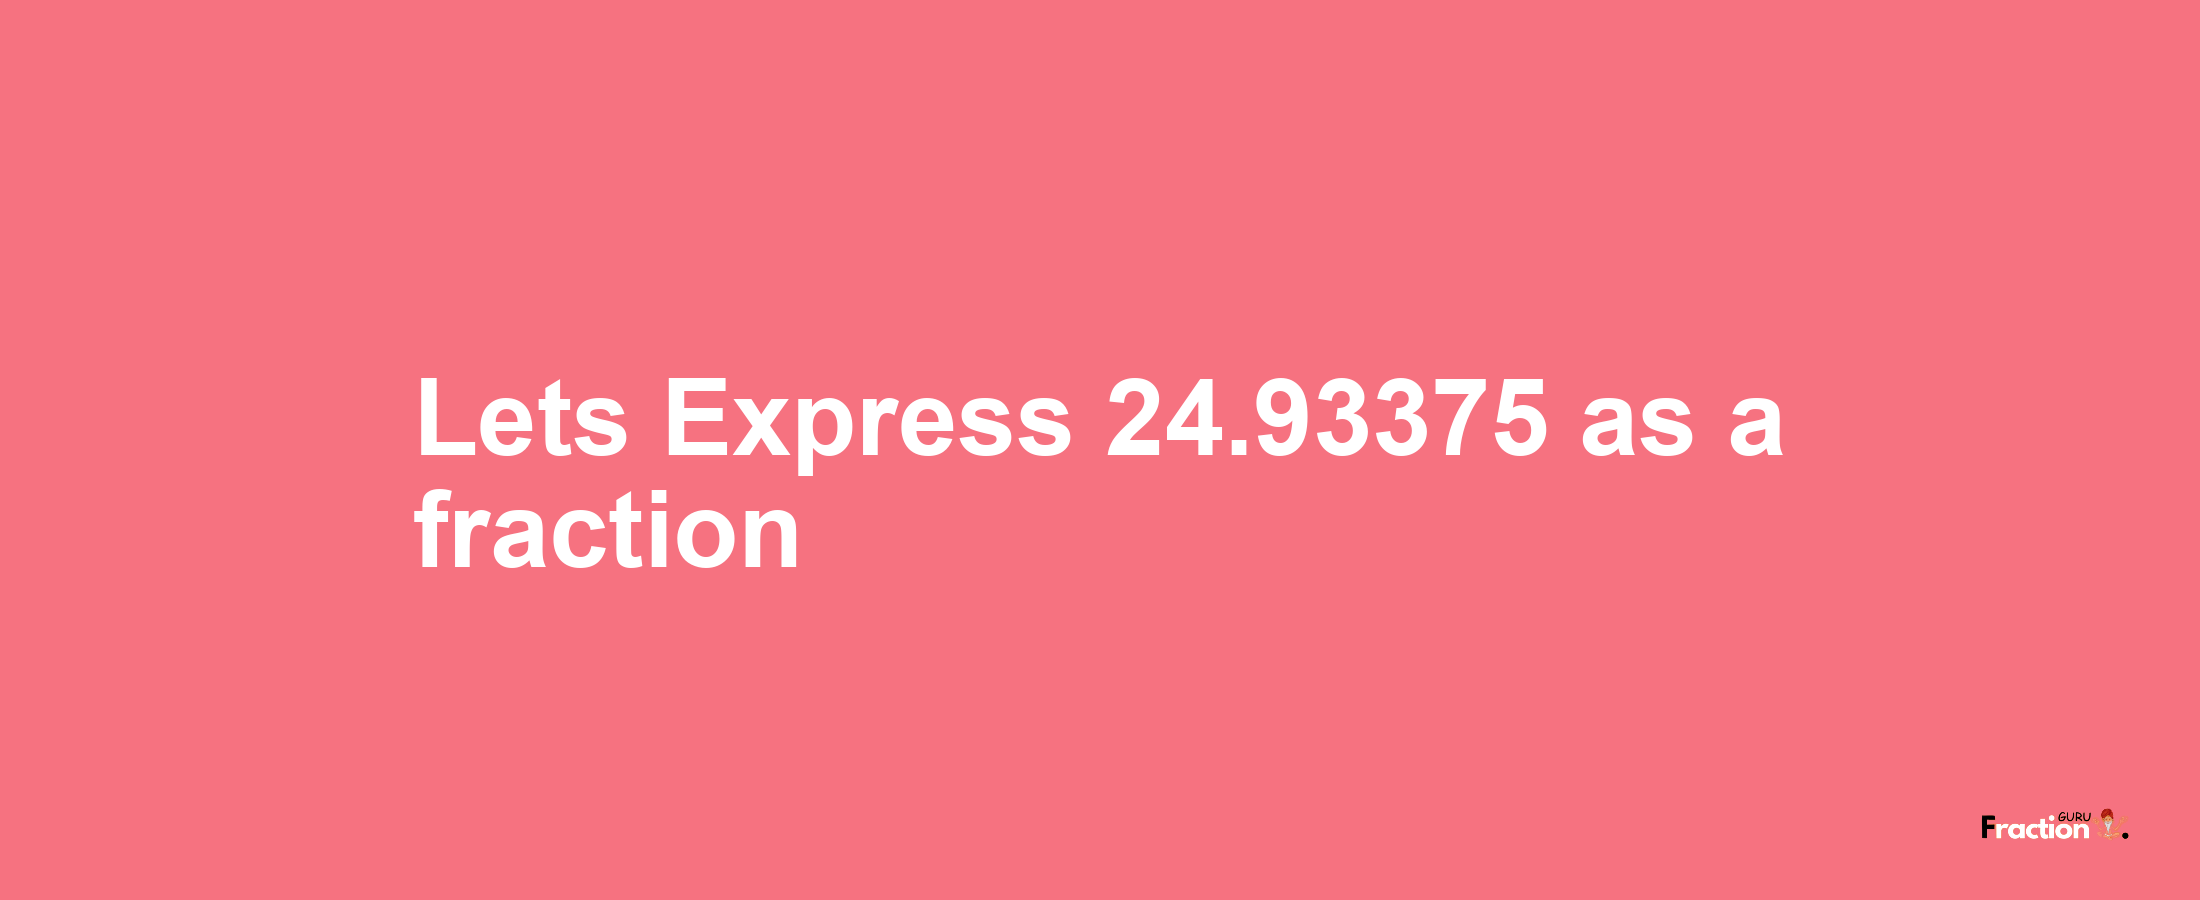 Lets Express 24.93375 as afraction